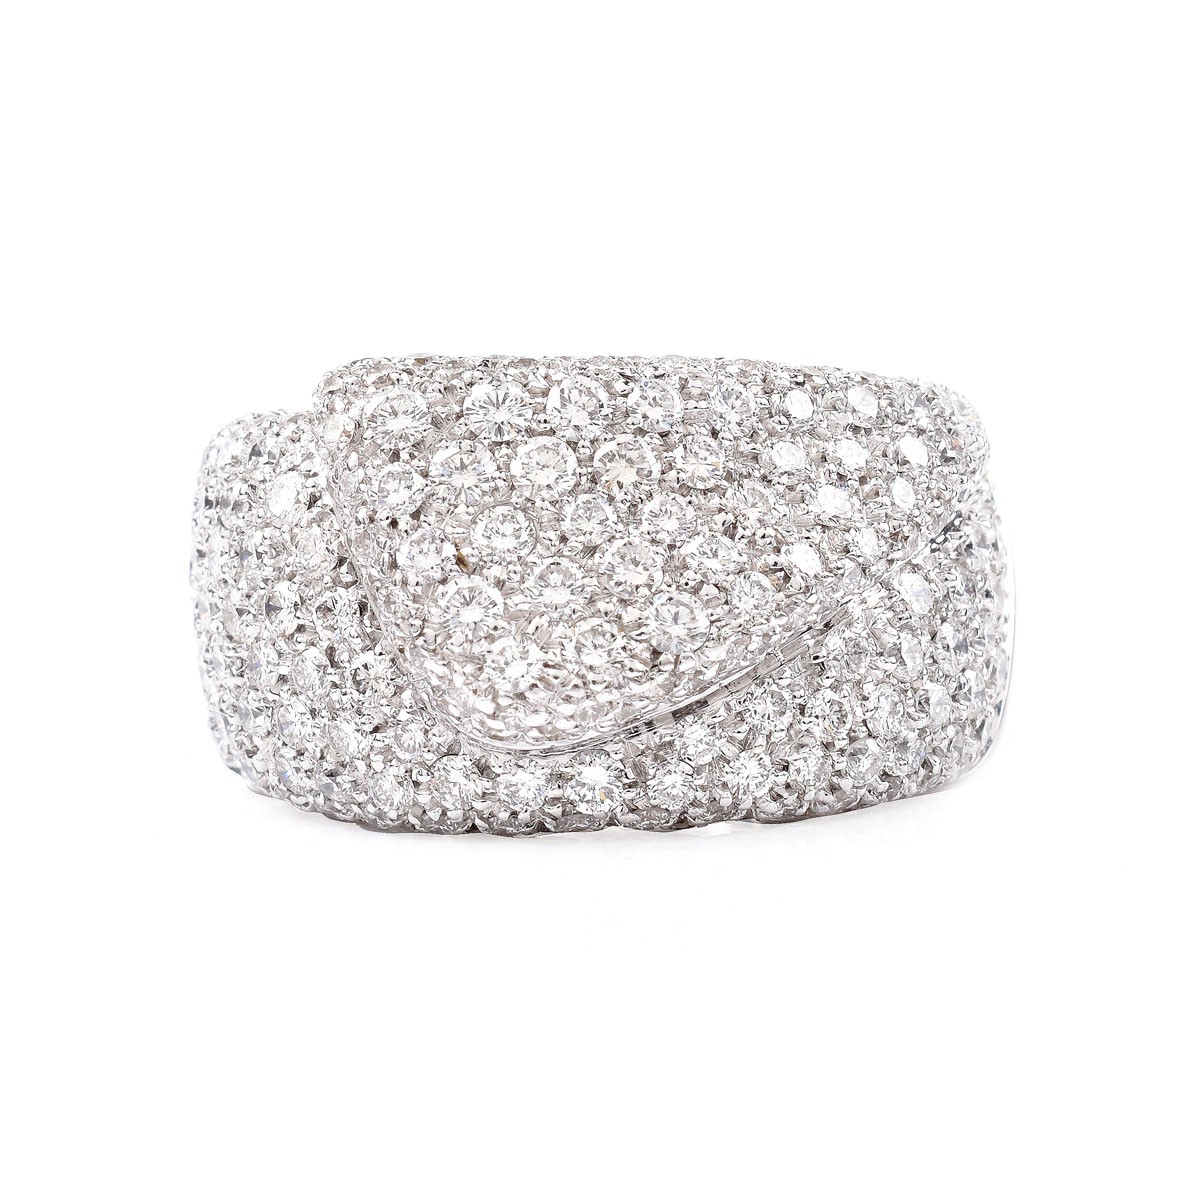 Contemporary Approx. 3.50 Carat Pave Set Round Brilliant Cut Diamond and 18 Karat White Gold Dinner Ring.